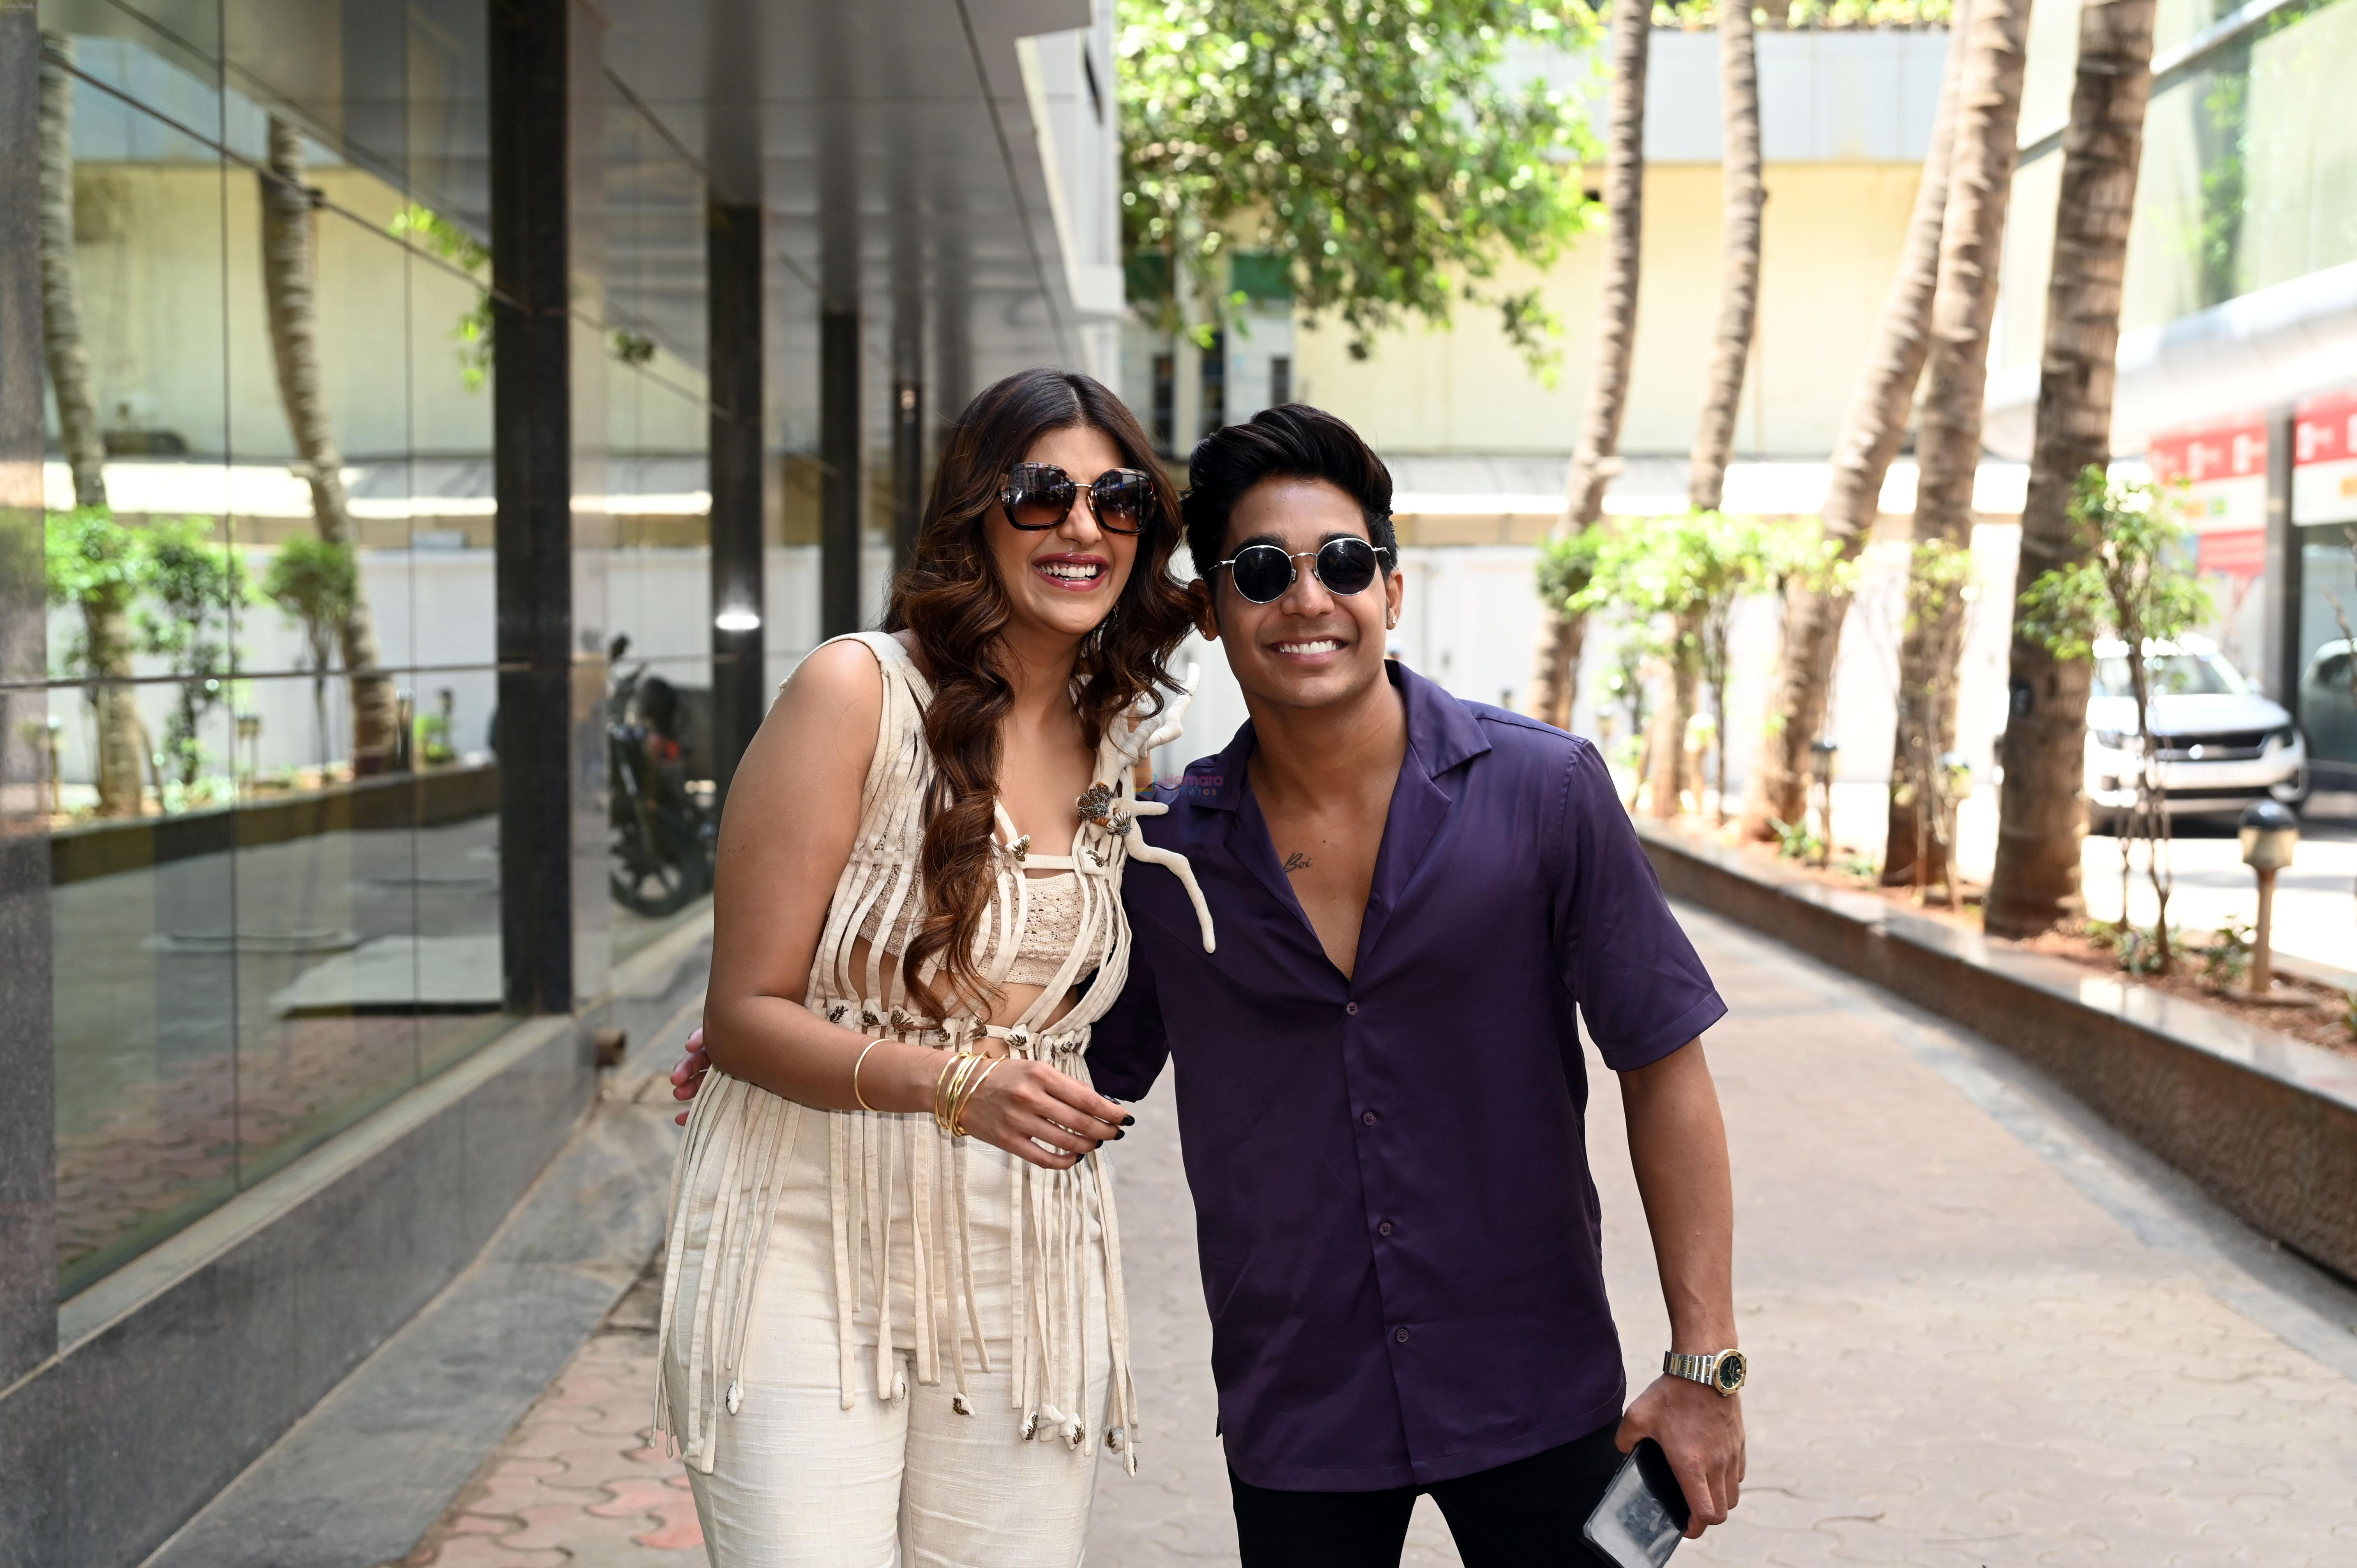 Rohit Zinjurke And Nimrit Kaur Ahluwalia at the Launch Of new song Zihaal e Miskin